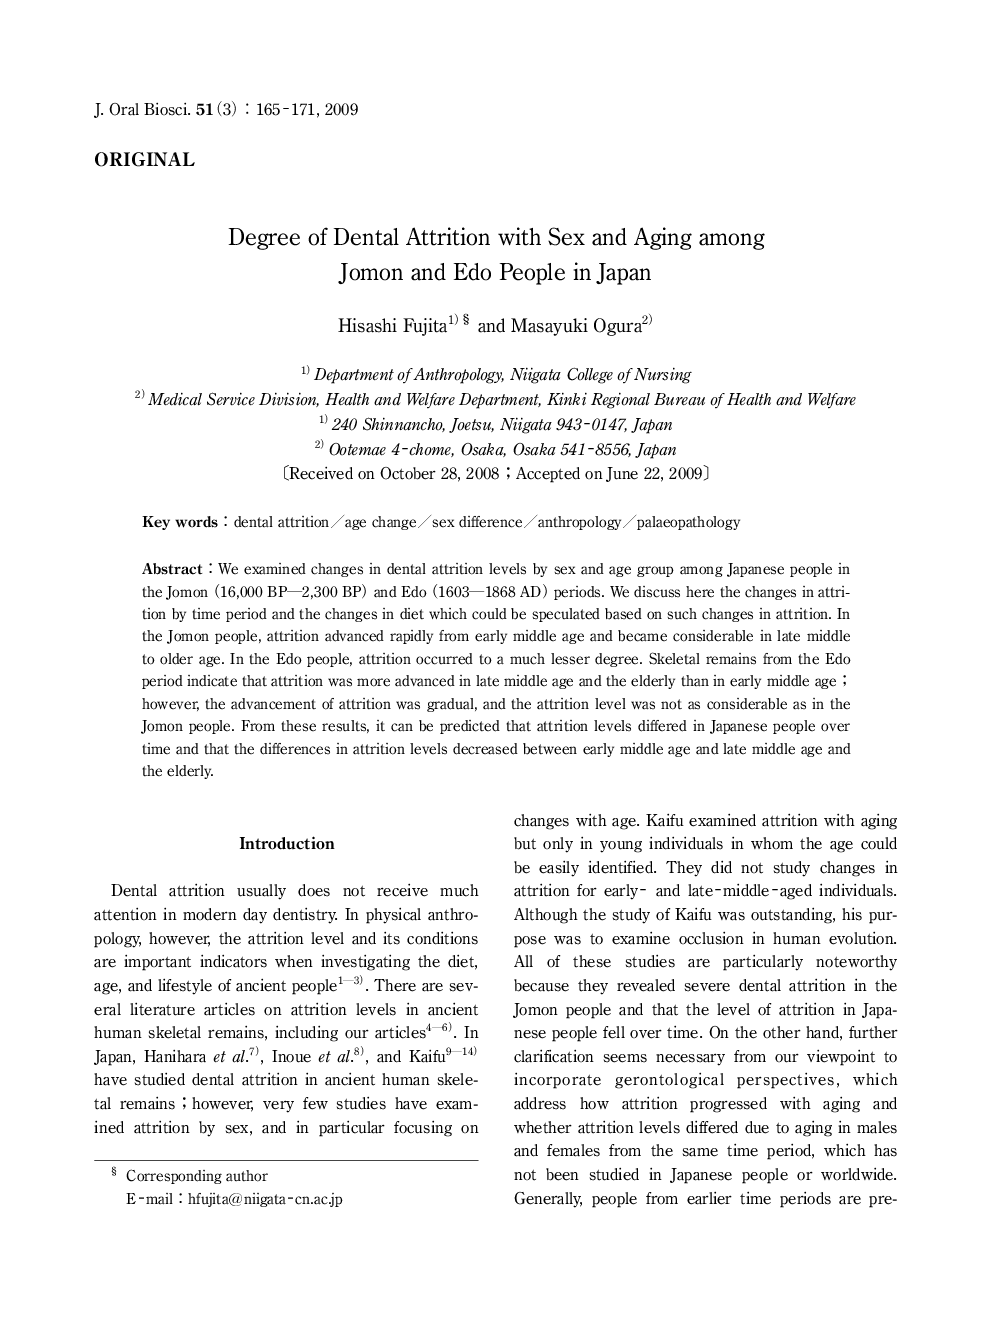 Degree of Dental Attrition with Sex and Aging among Jomon and Edo People in Japan